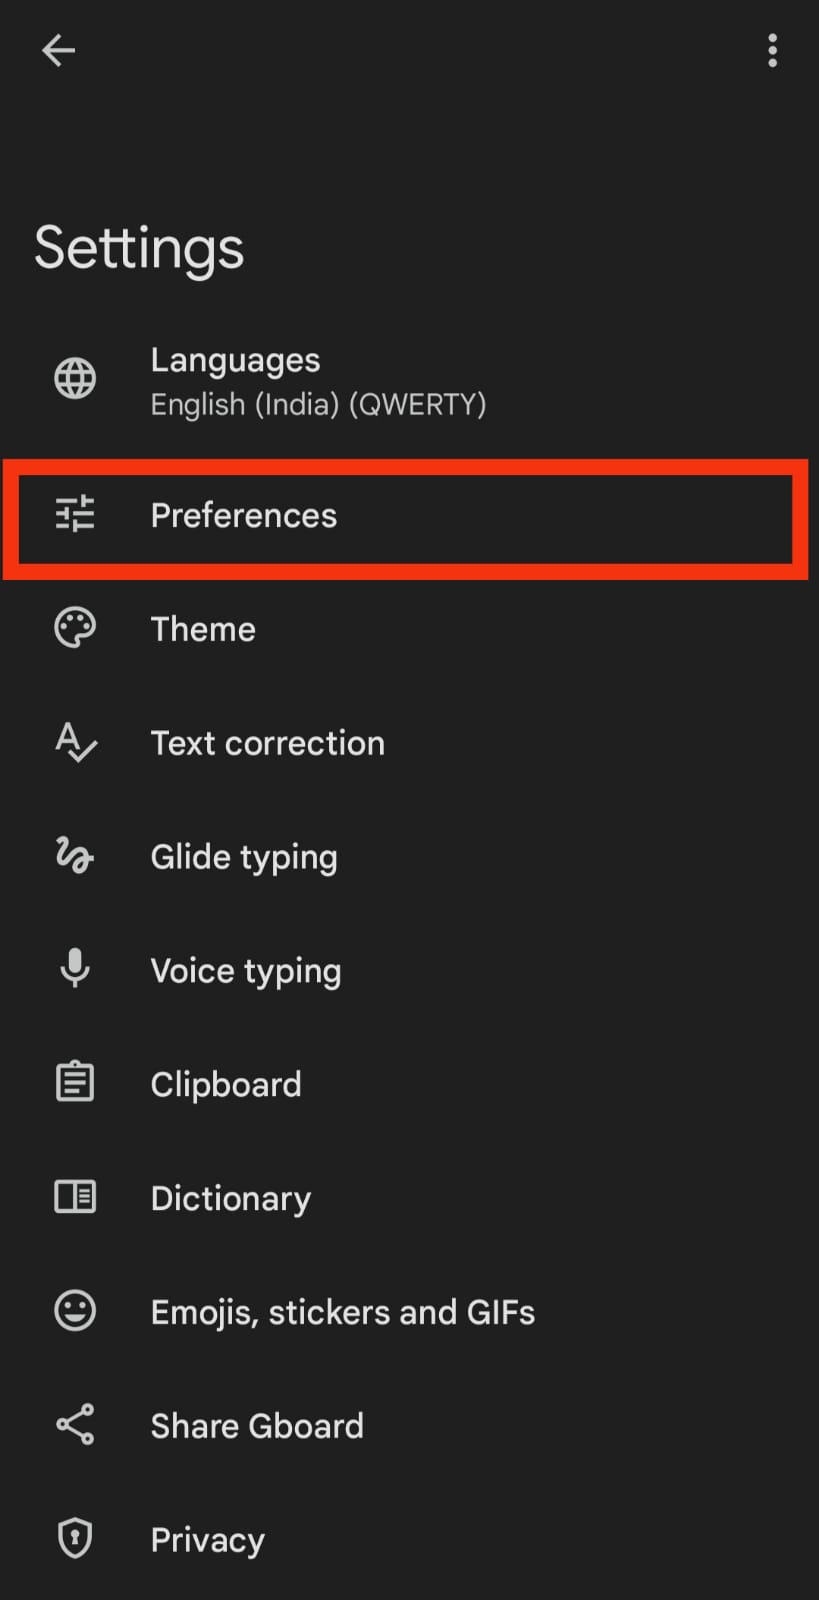 Tap on Preferences.